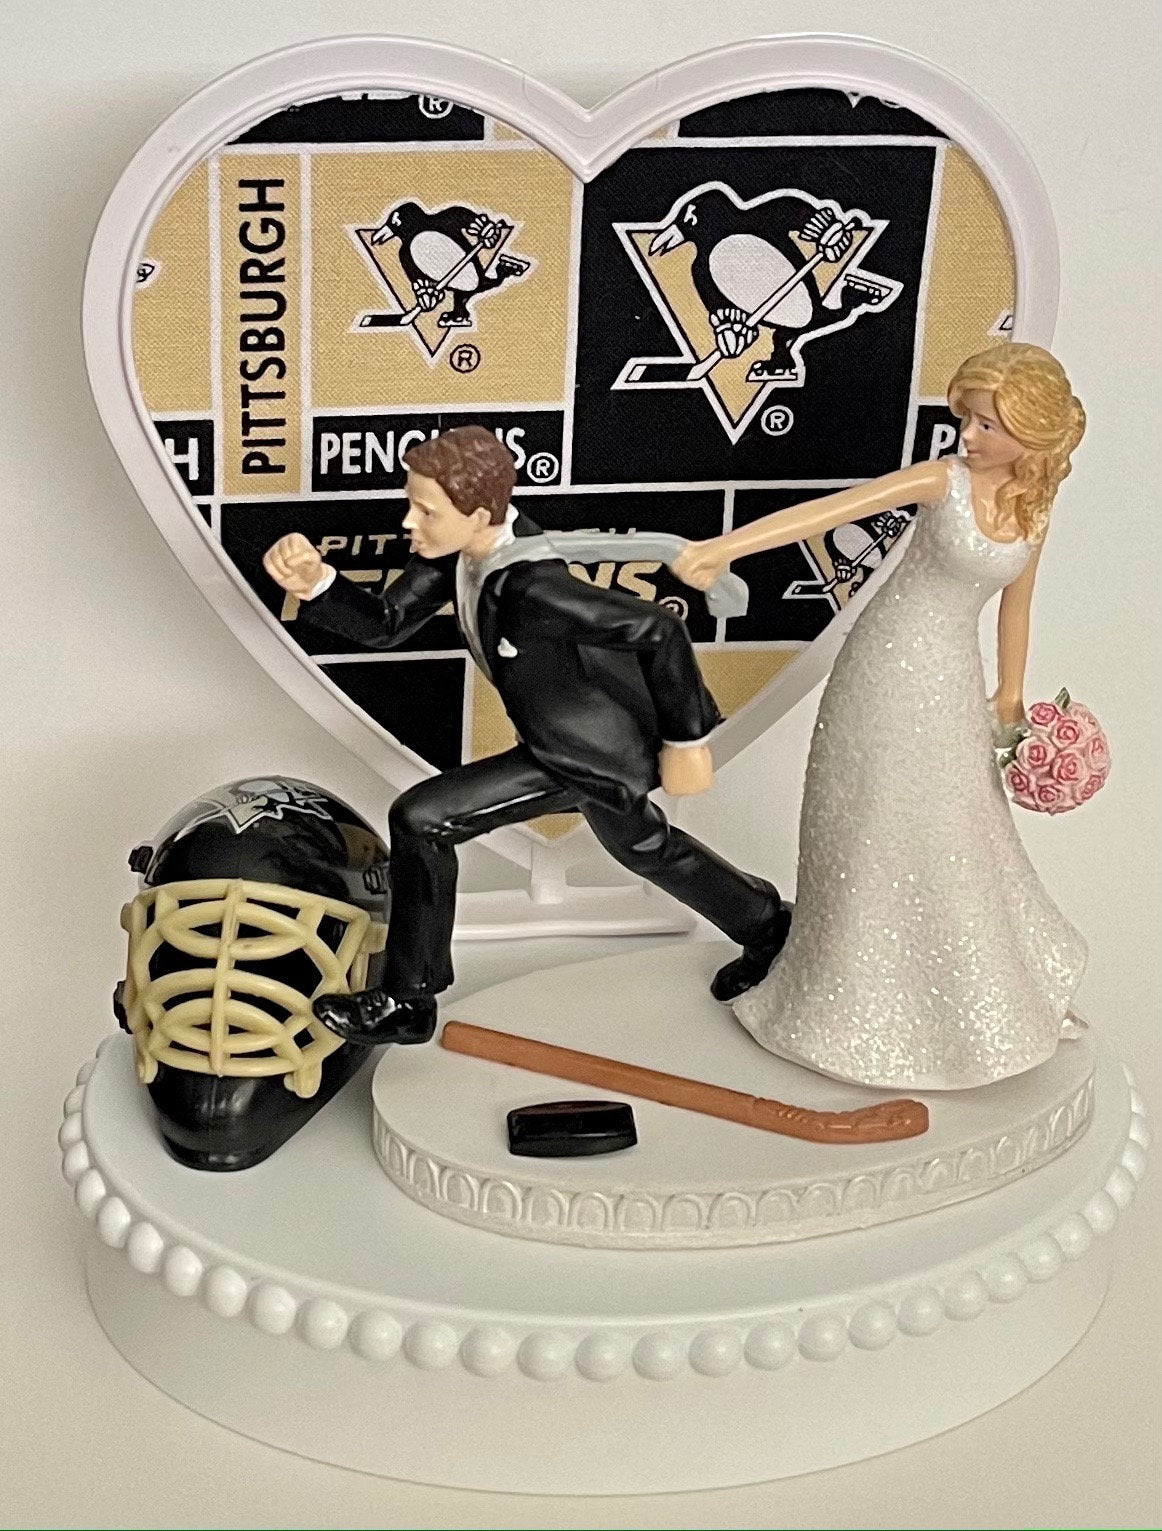 Wedding Cake Topper Pittsburgh Penguins Hockey Themed Running Funny Humorous Bride Groom Pens Sports Fans Reception Fun Groom's Cake Top